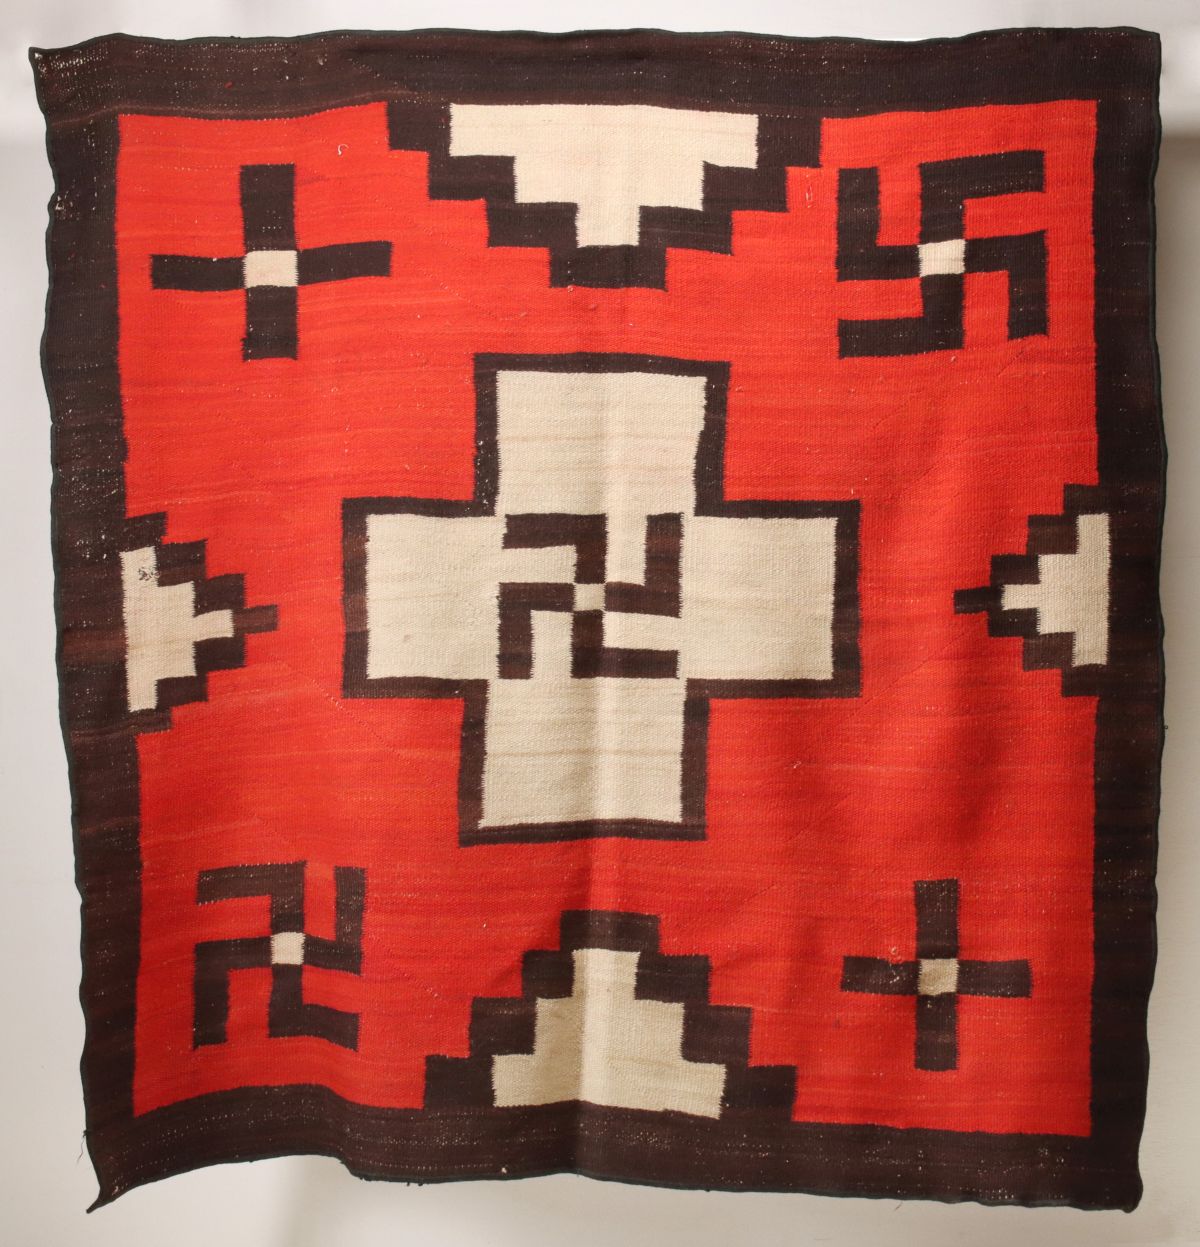 A 75 x 70 NAVAJO WEAVING WITH CENTRAL CROSS C. 1930